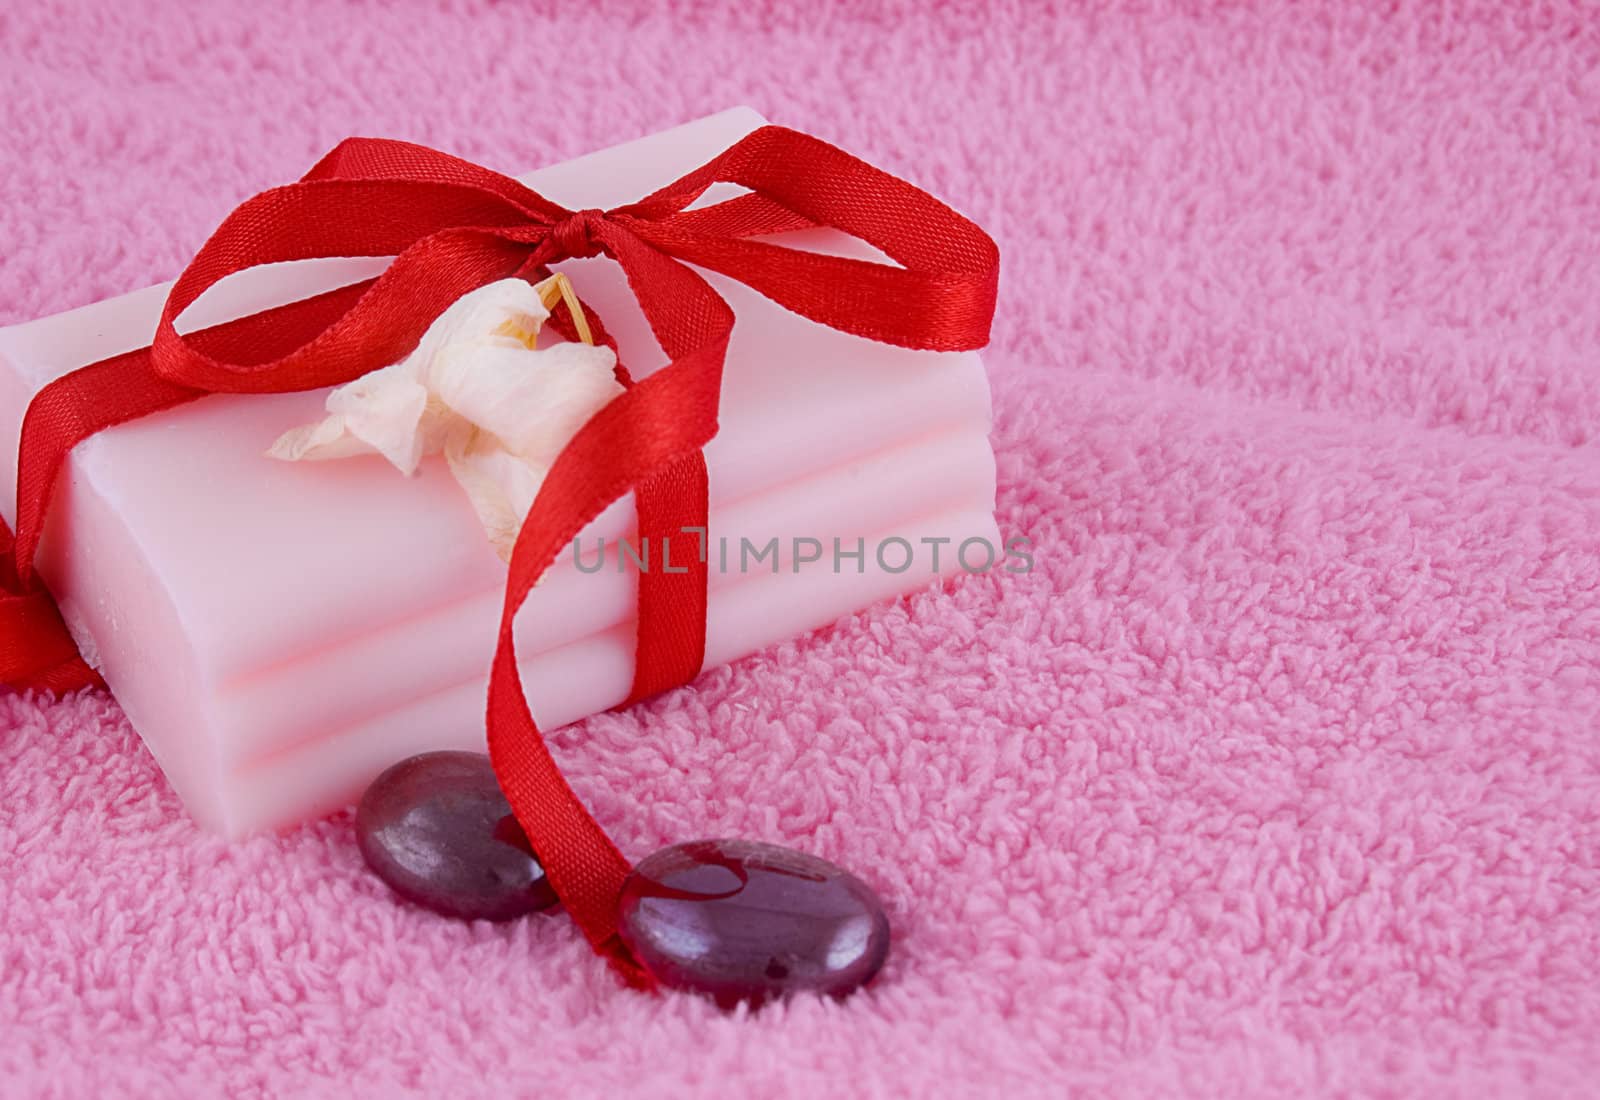 Soap with roses and stones over pink towel